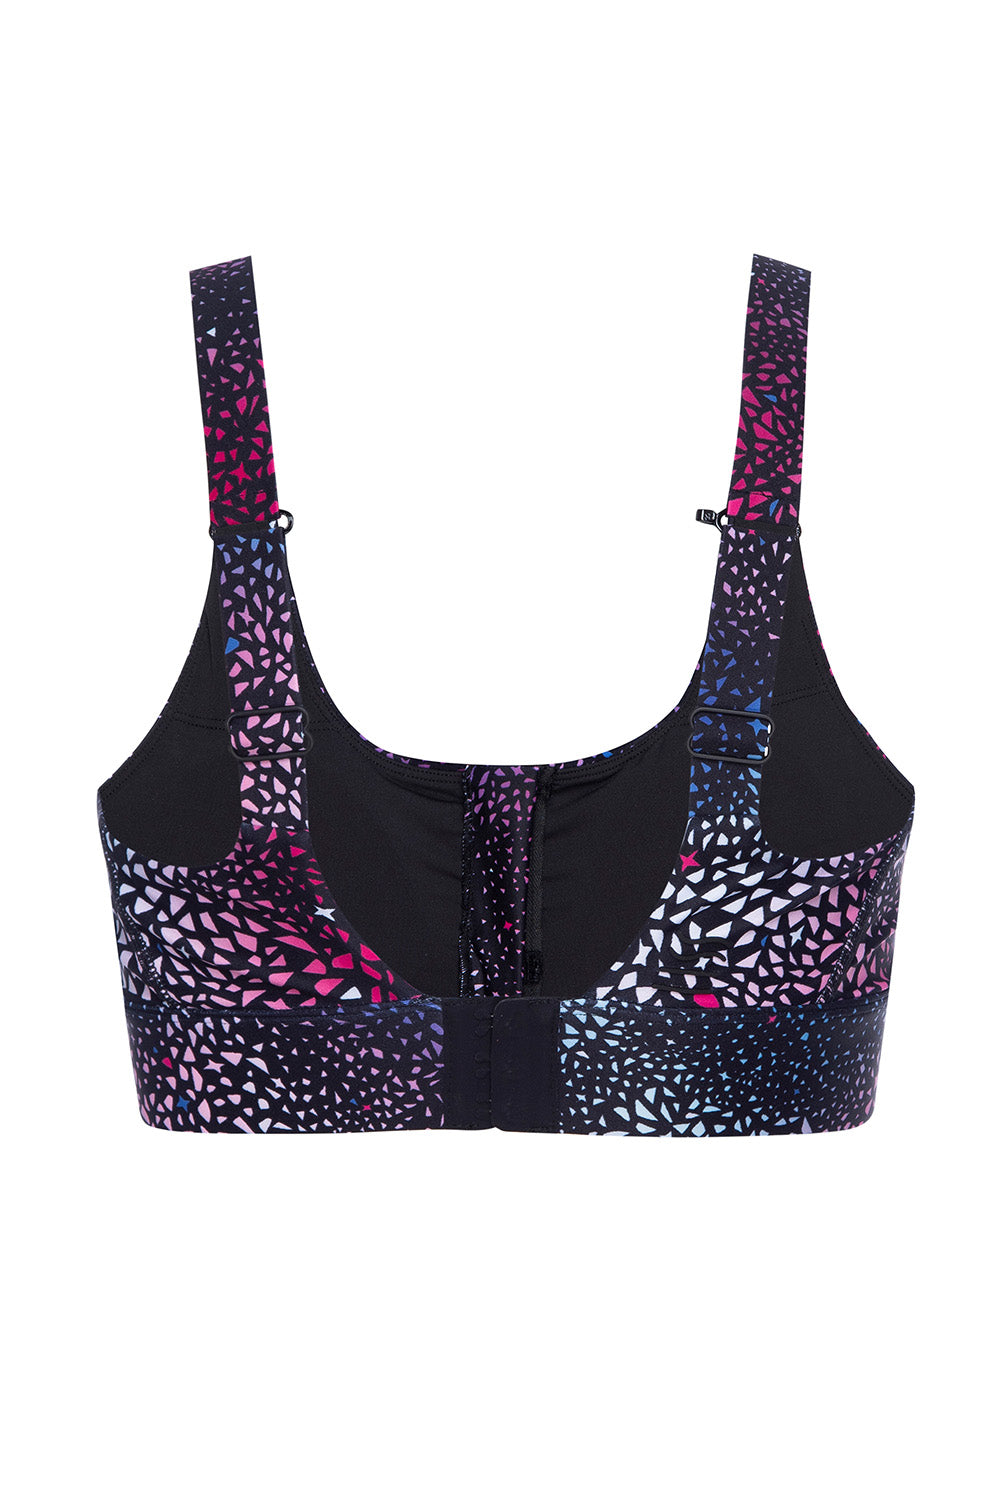 Soho galaxy active bra top on white background back view.